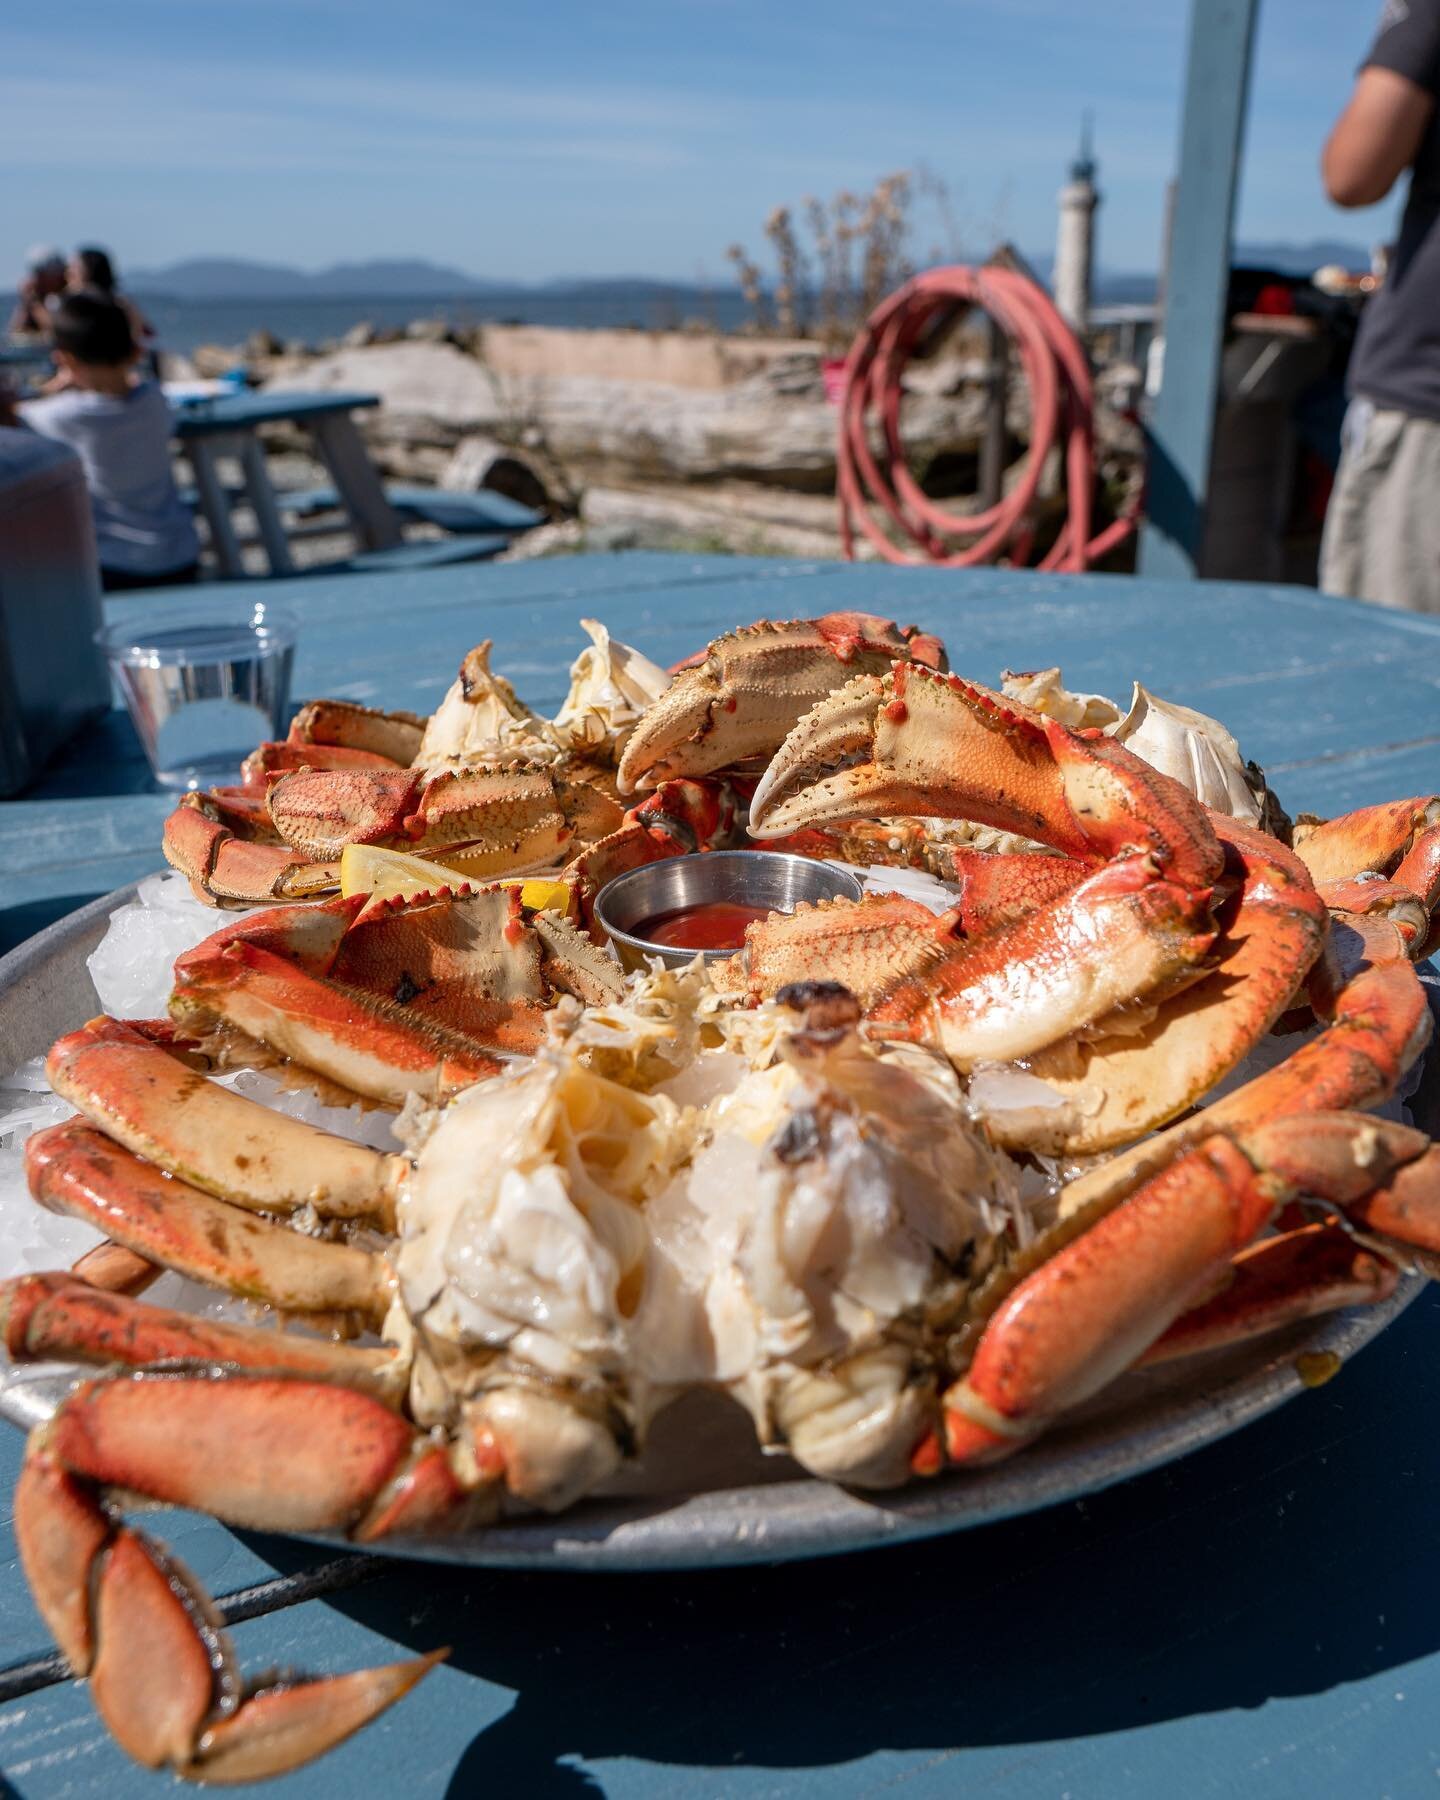 📍 @taylorshellfish 

Hope you all had a great 4th of July! It&rsquo;s finally crabbing season. One of our favorite places of the season is to take a trip to @taylorshellfish for all the fresh seafood!